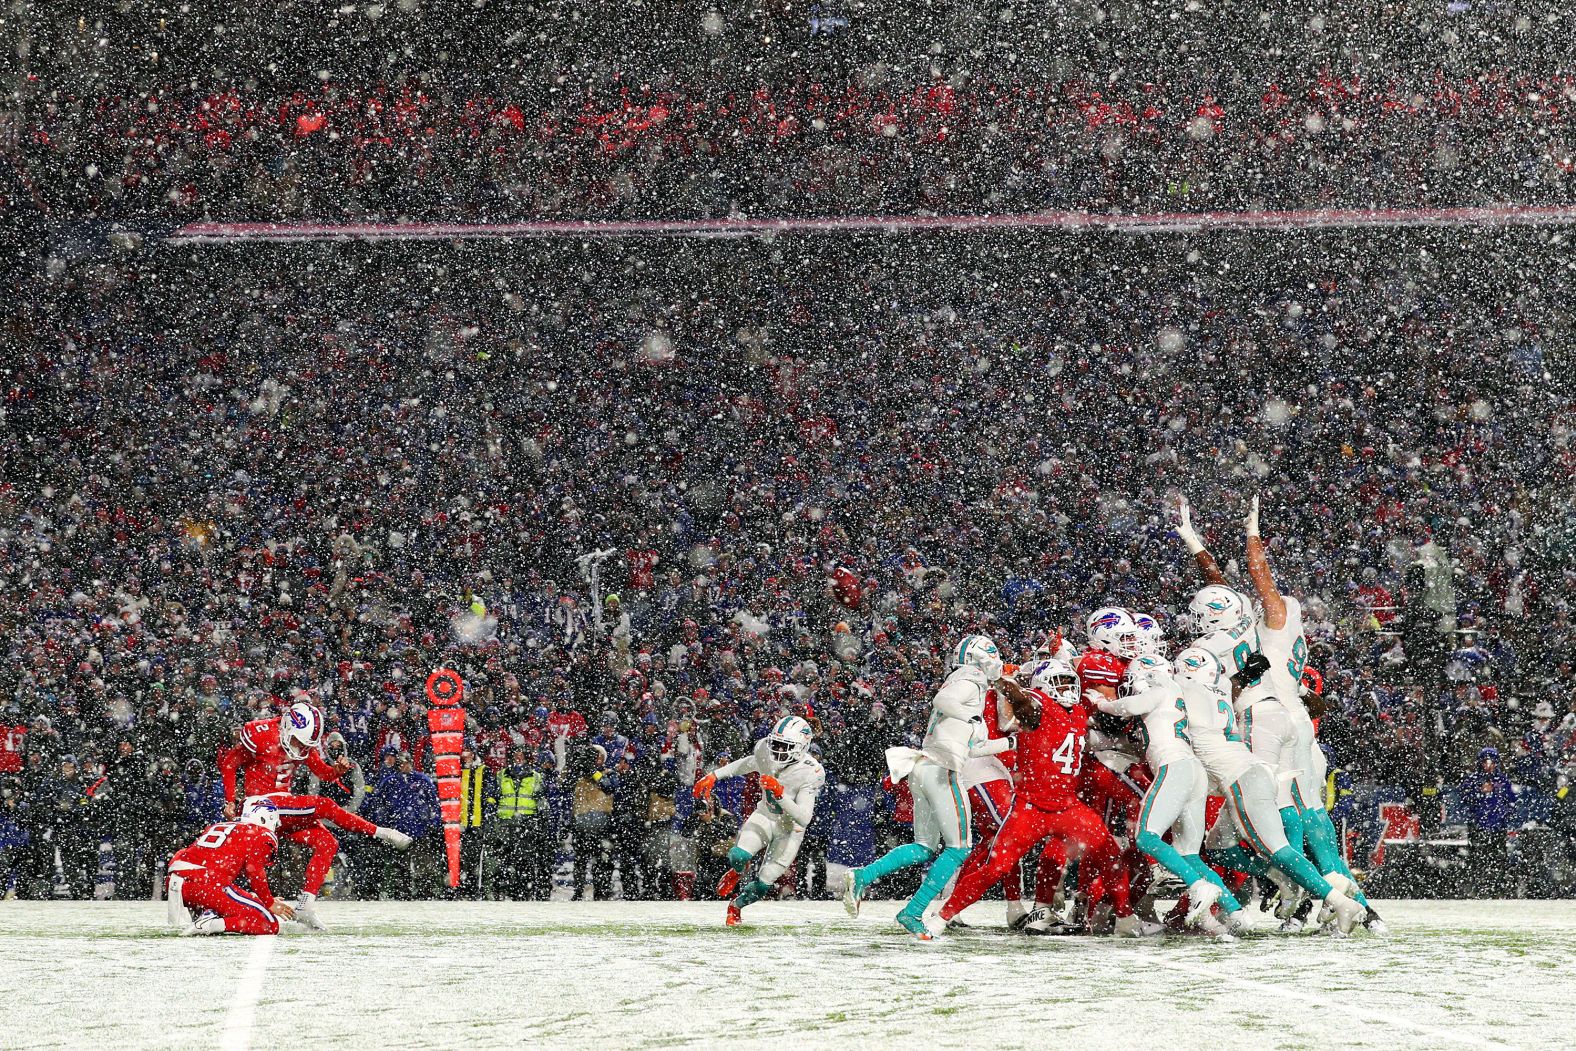 Tyler Bass of the Buffalo Bills kicks a game-winning field goal against the Miami Dolphins in Orchard Park, New York, on Saturday, December 17. The Bills surged past the Dolphins in the 4th quarter to overcome an eight-point deficit, winning 32-29.